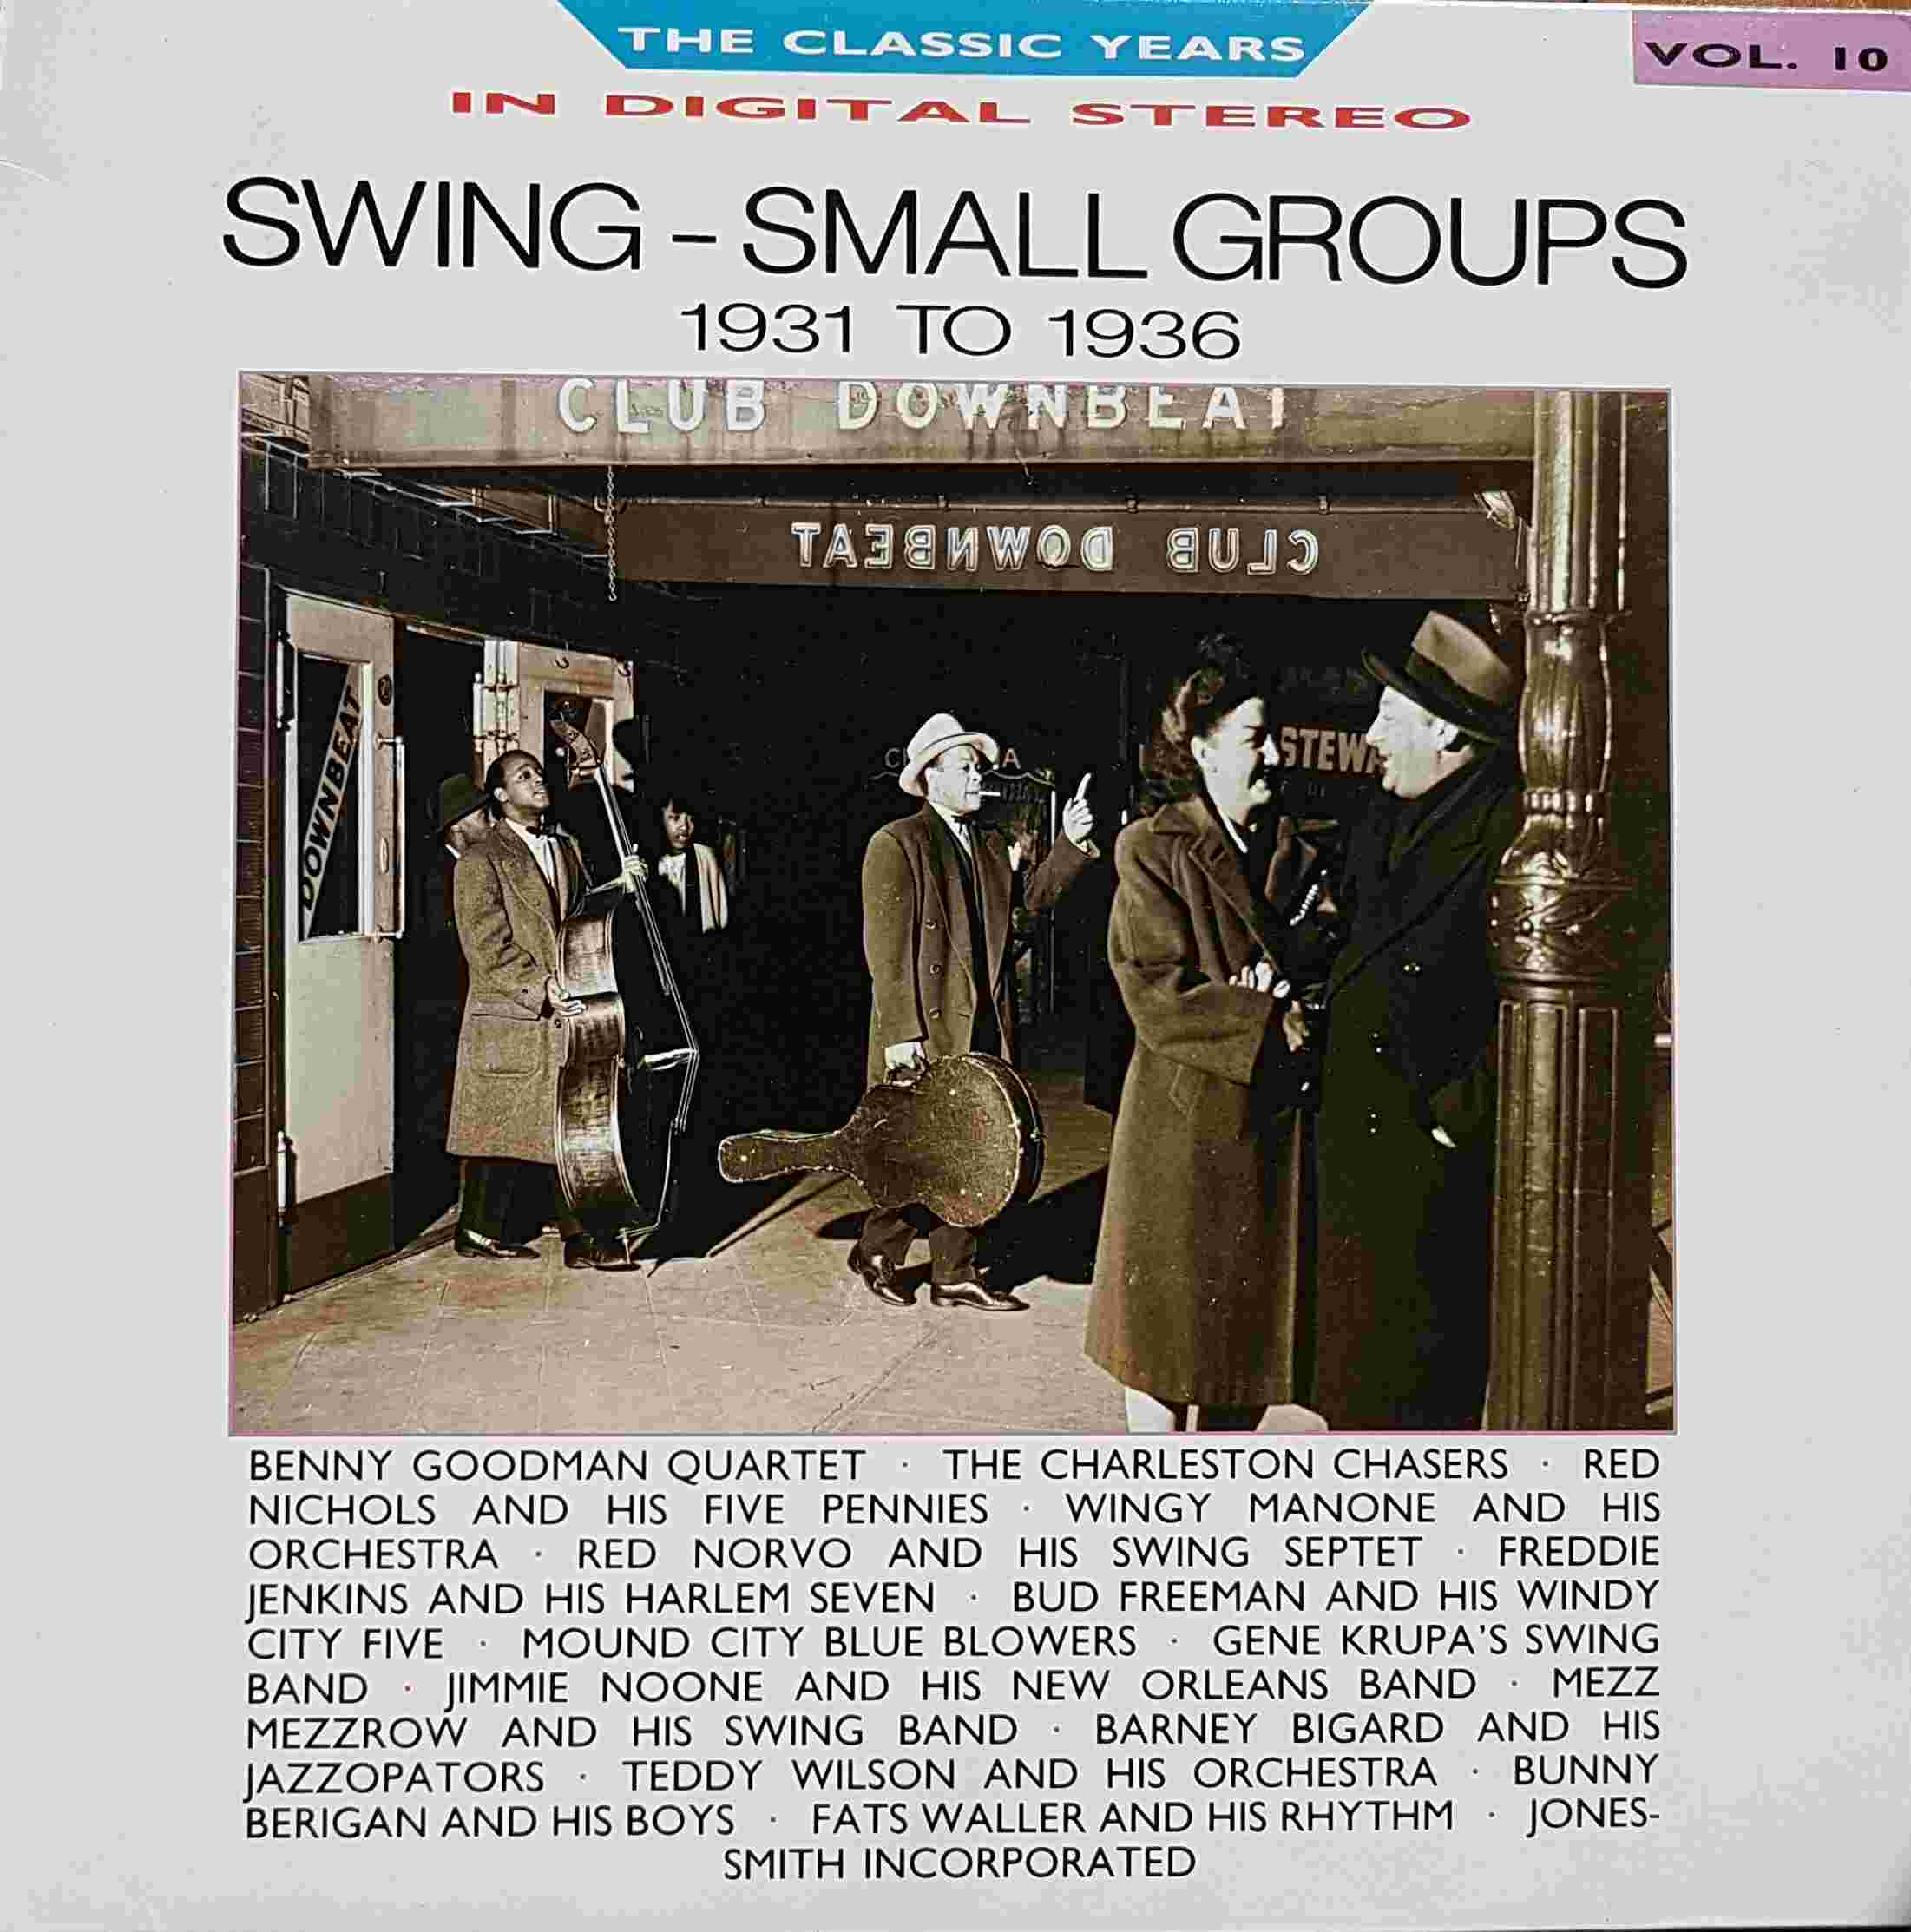 Picture of REB 666 Classic years - Volume 10, Swing small groups by artist Various from the BBC records and Tapes library